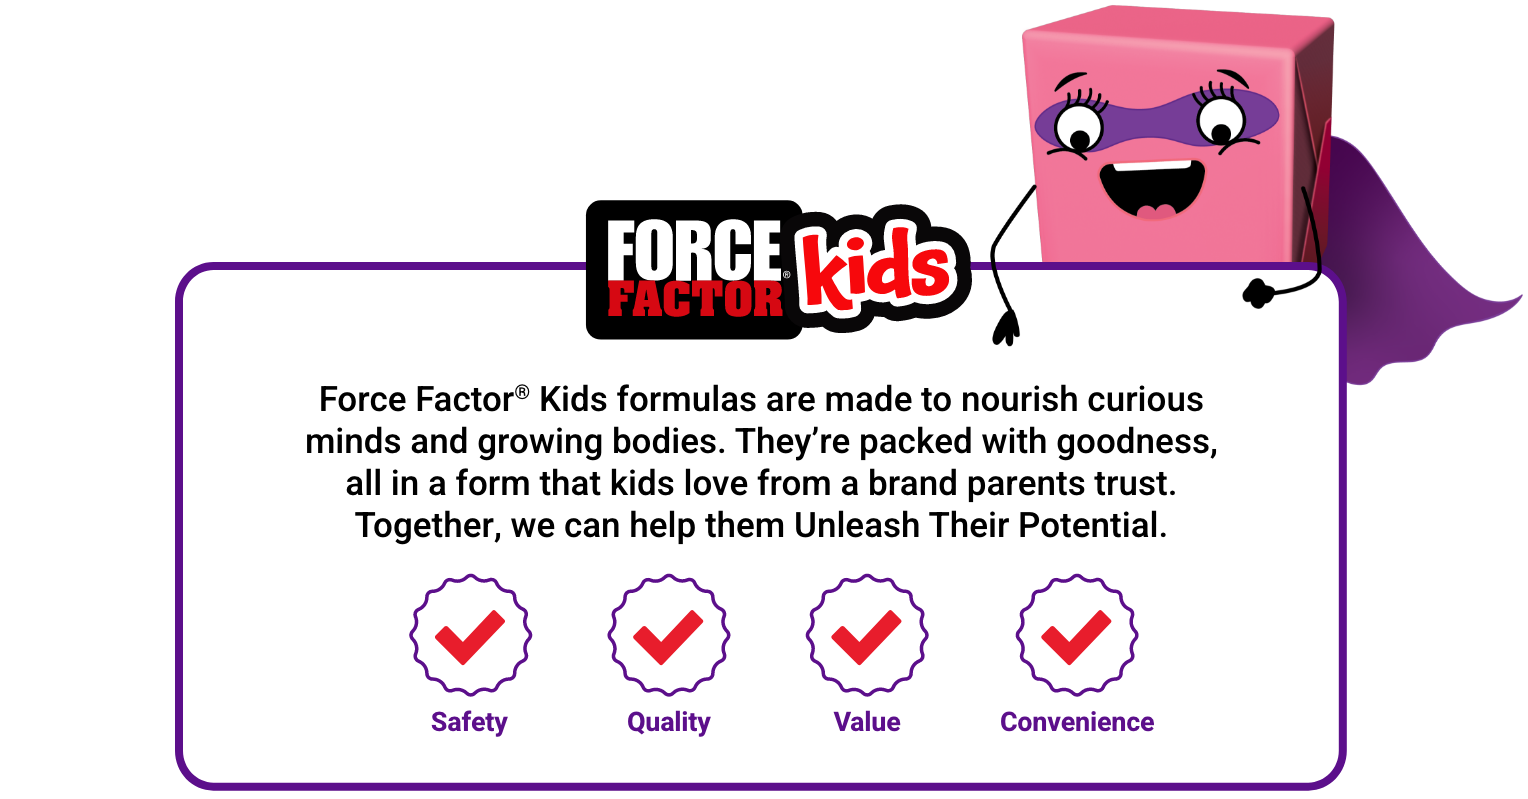 Force Factor Kids formulas are made to nourish curious minds and growing bodies. They're packed with goodness, all in a form that kids love from a brand parents trust